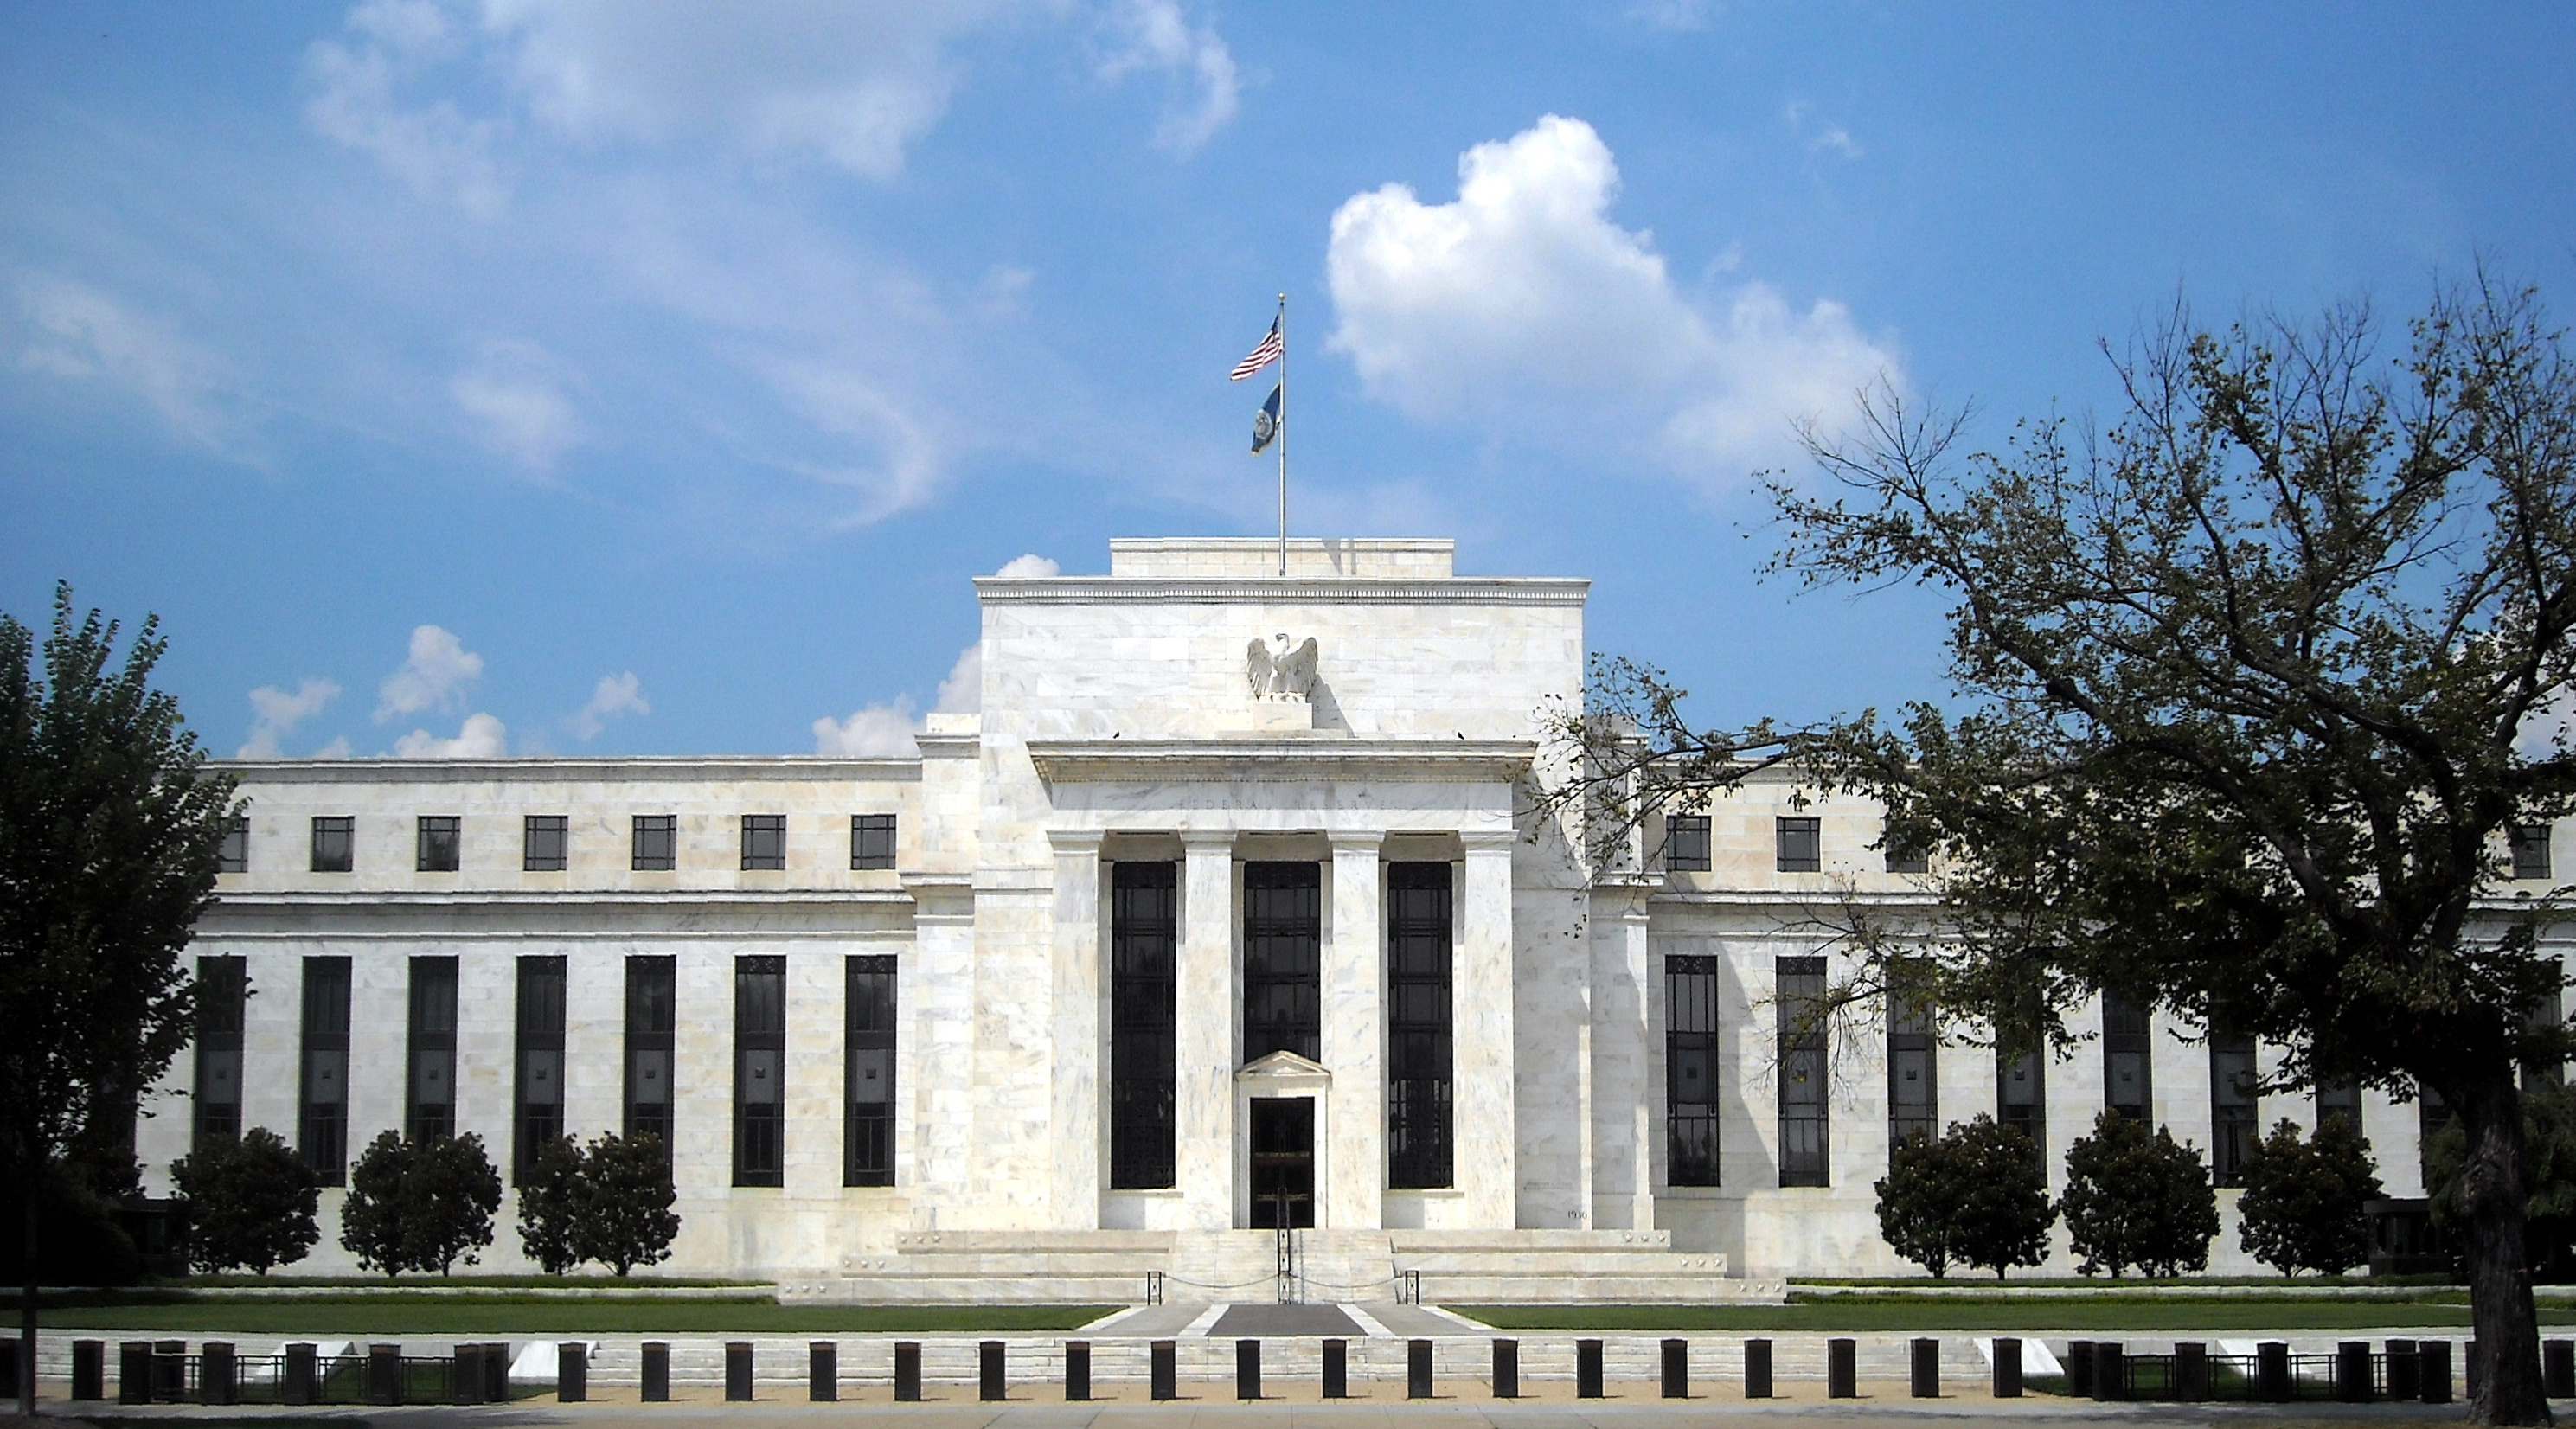 Central Banks in Panic Mode – Extreme Tactics Like Helicopter Money Discussed